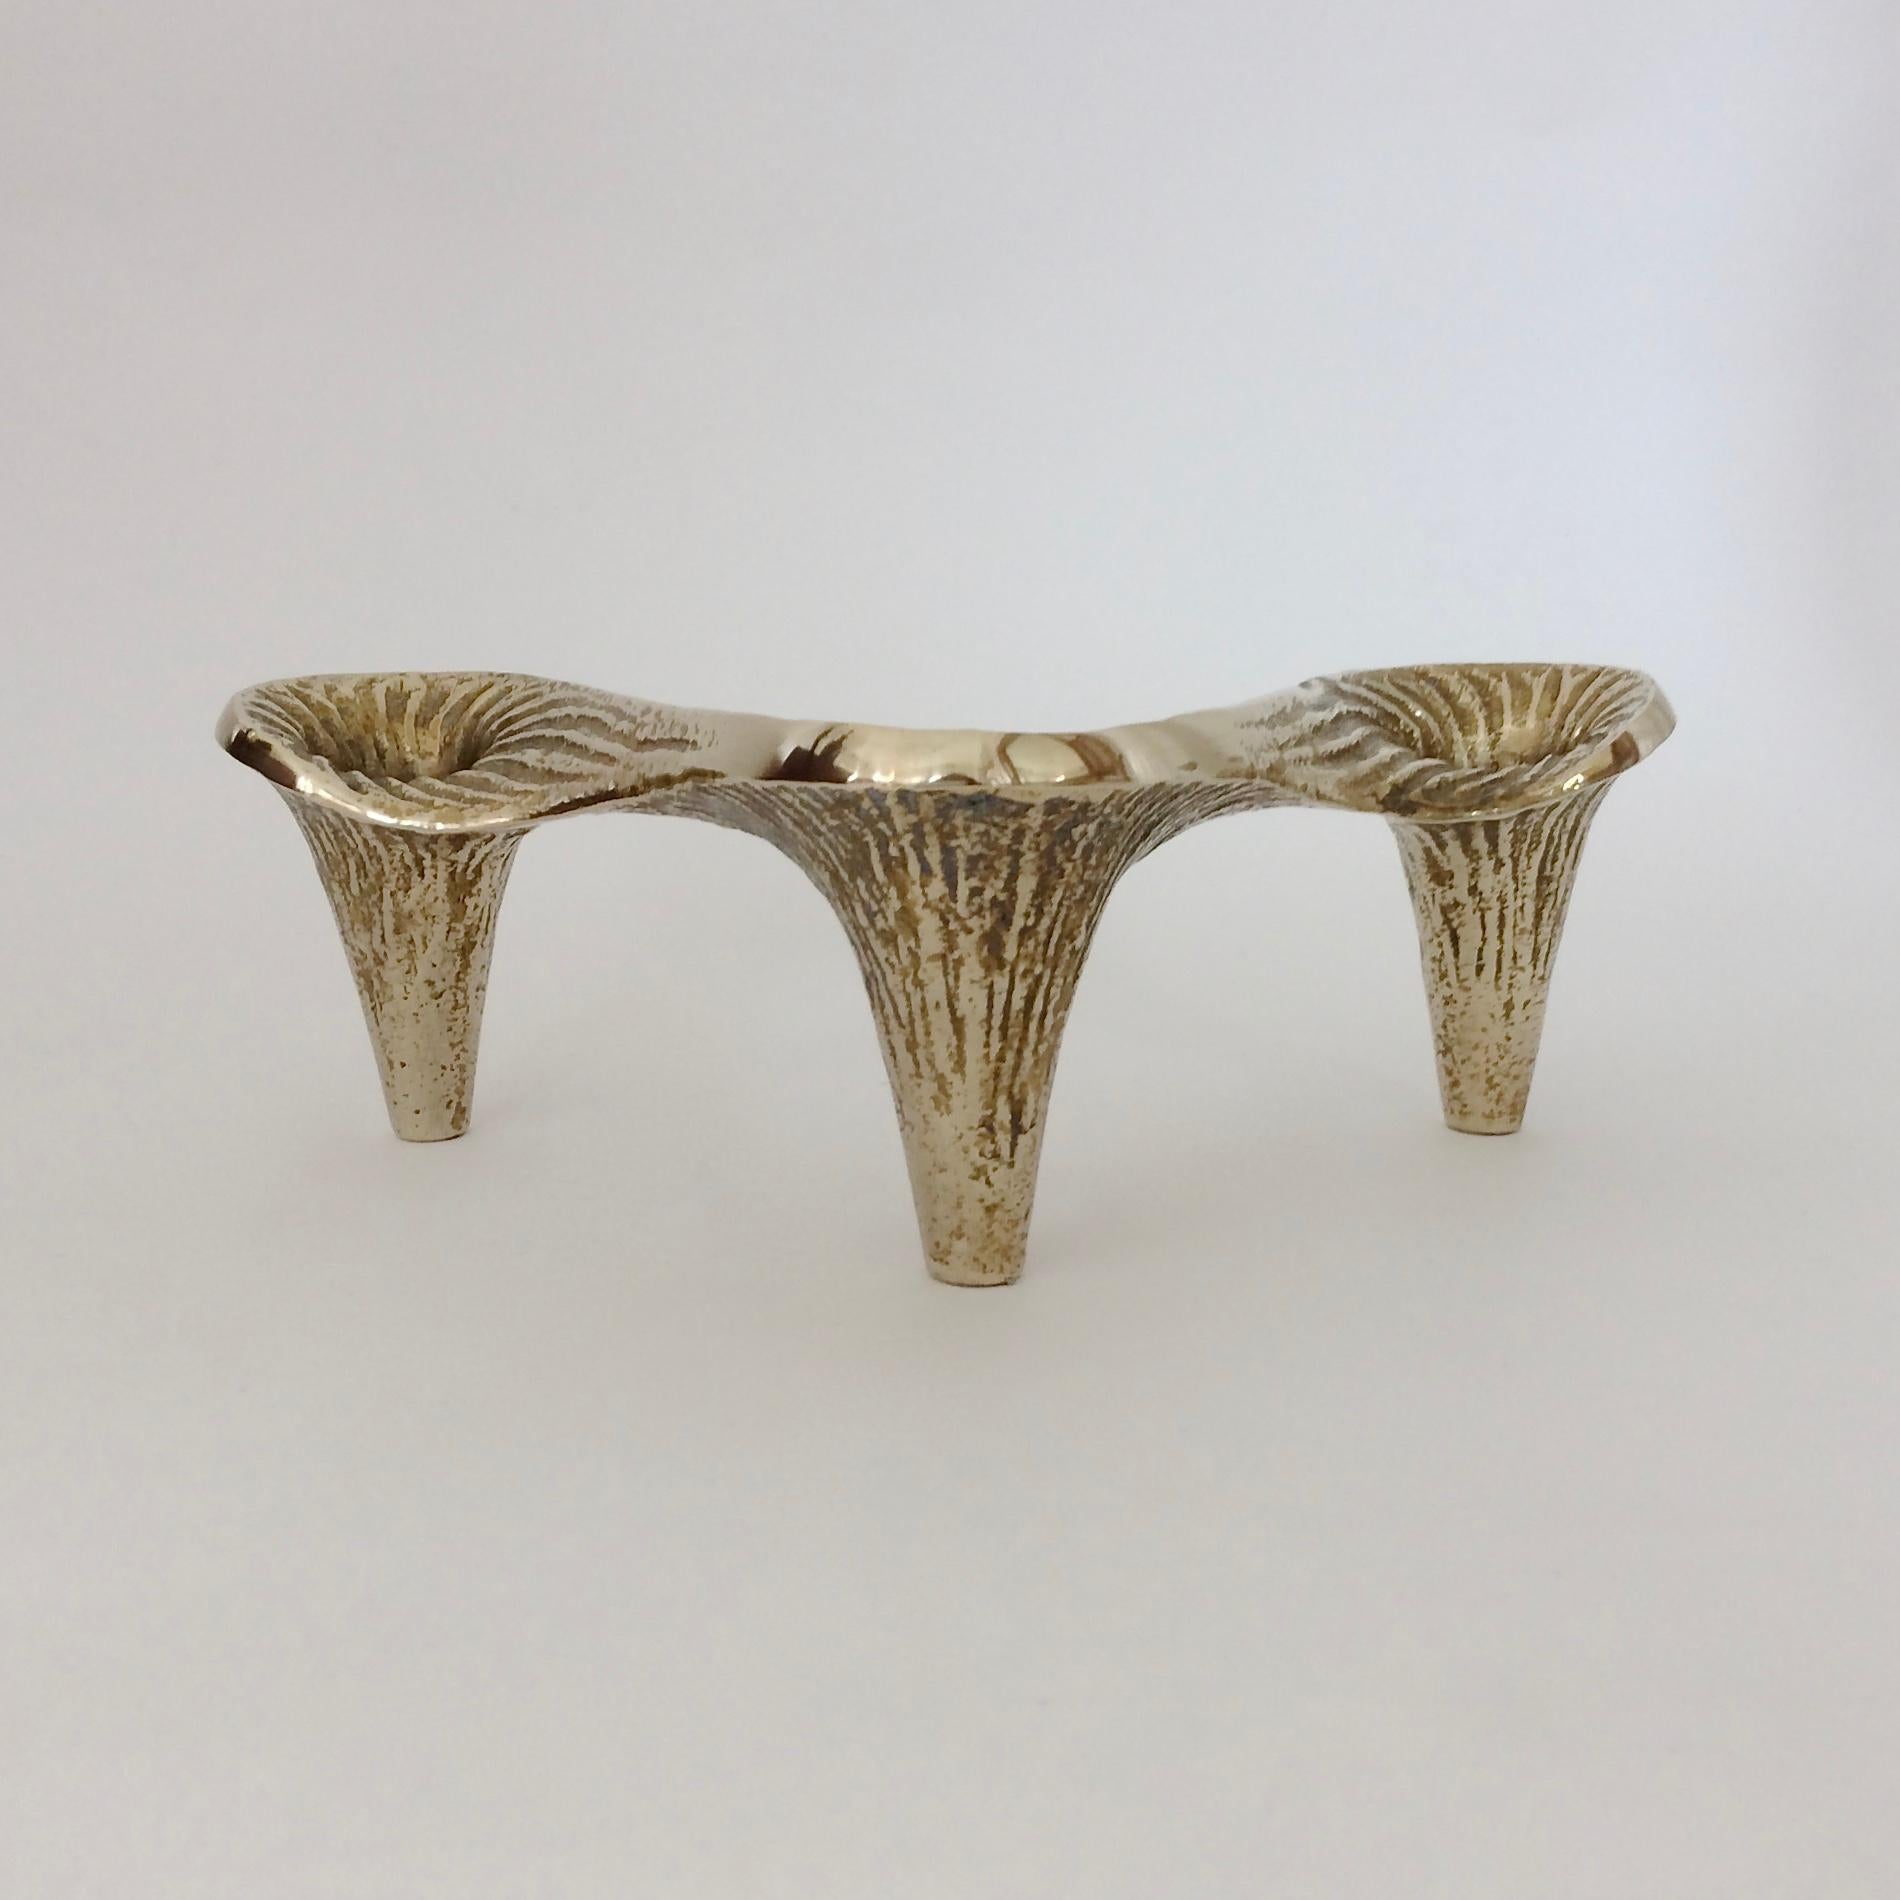 Nice midcentury Scandinavian candleholder, circa 1970.
Gilt bronze.
Dimensions: 22 cm W, 7 cm H, 13 cm D.
All purchases are covered by our Buyer Protection Guarantee.
This item can be returned within 7 days of delivery.
Please ask for our best